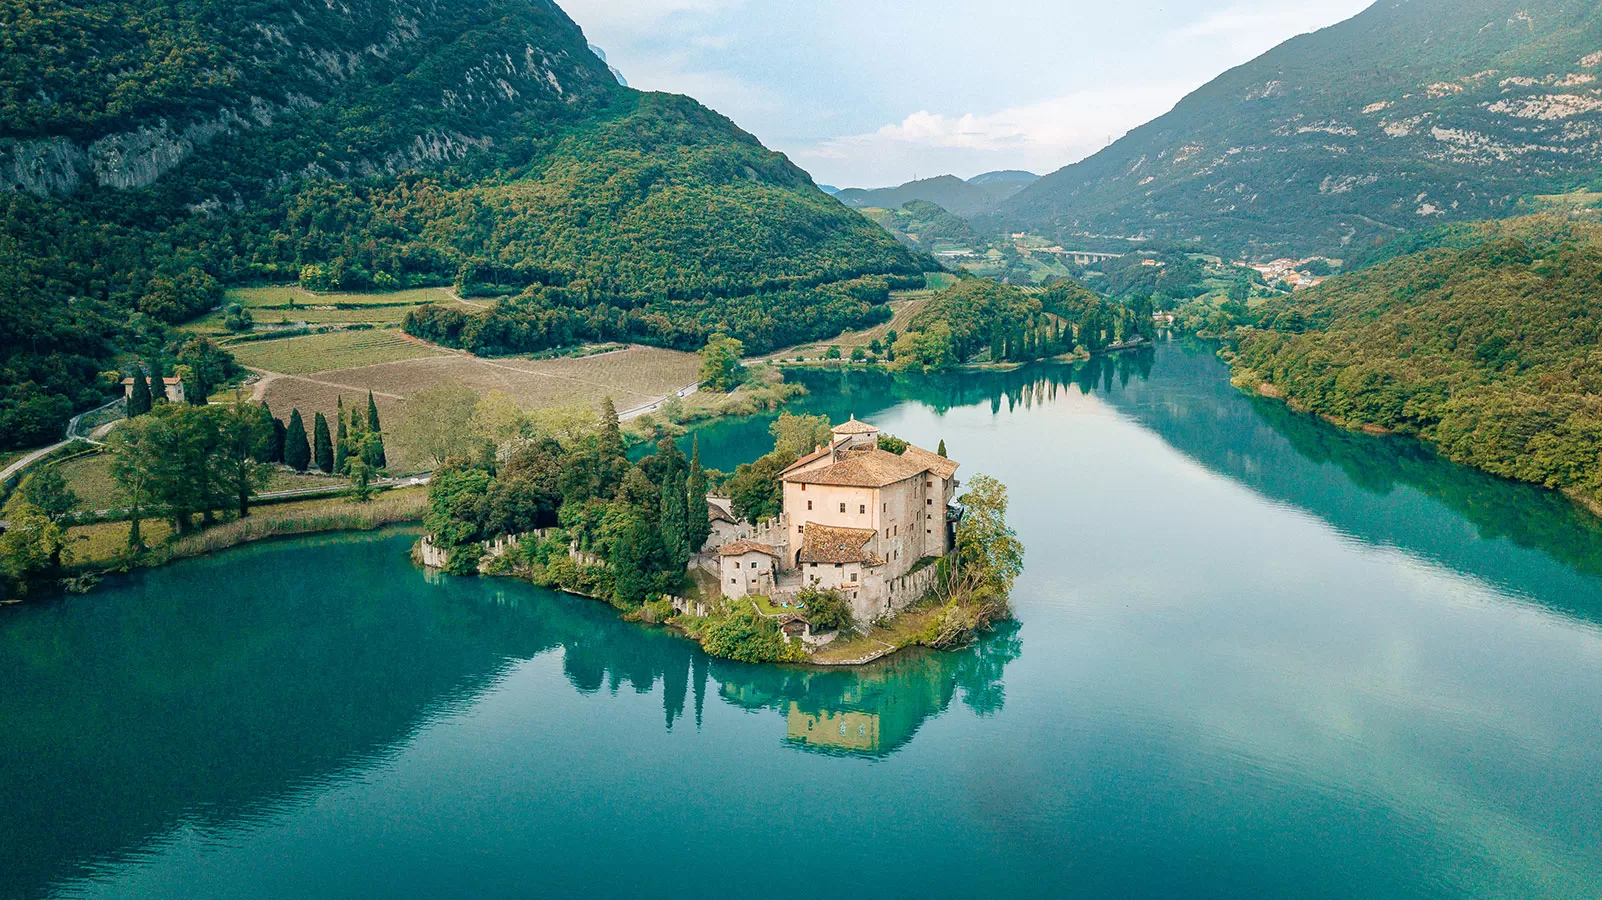 Best Time to Visit Italy - Summer weather in the mountains and lakes is milder